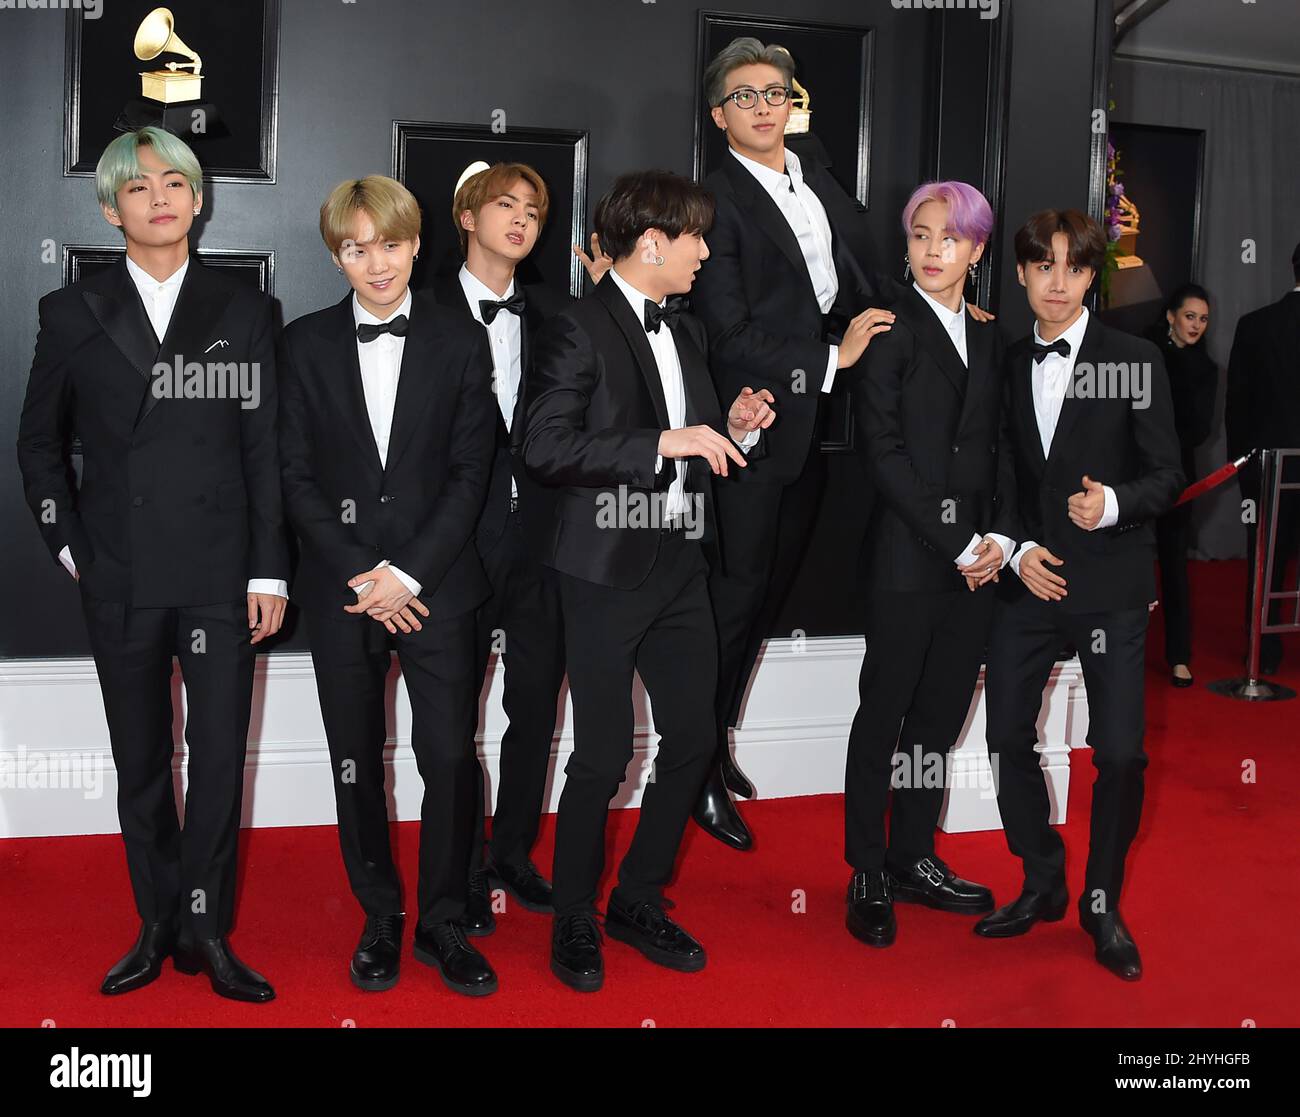 These Photos Of BTS At The 2020 Grammys Are Pure Perfection